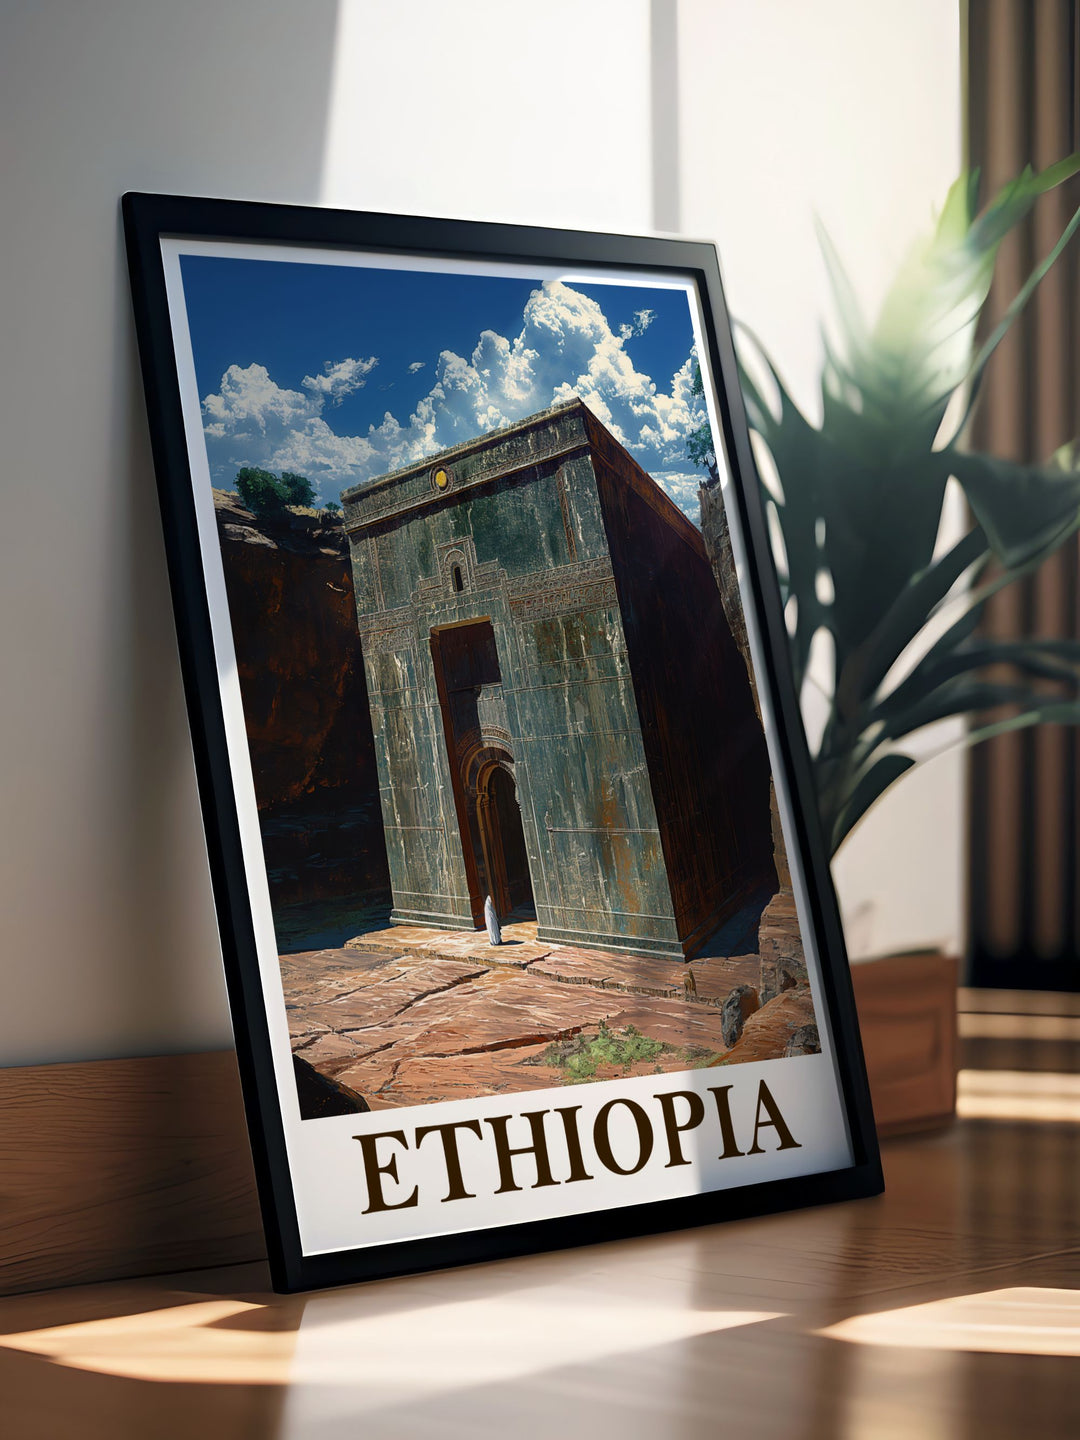 Colorful Ethiopia Decor featuring the Lalibela Rock Hewn Churches with detailed craftsmanship and vivid imagery adding cultural charm and elegance to your living space office or bedroom